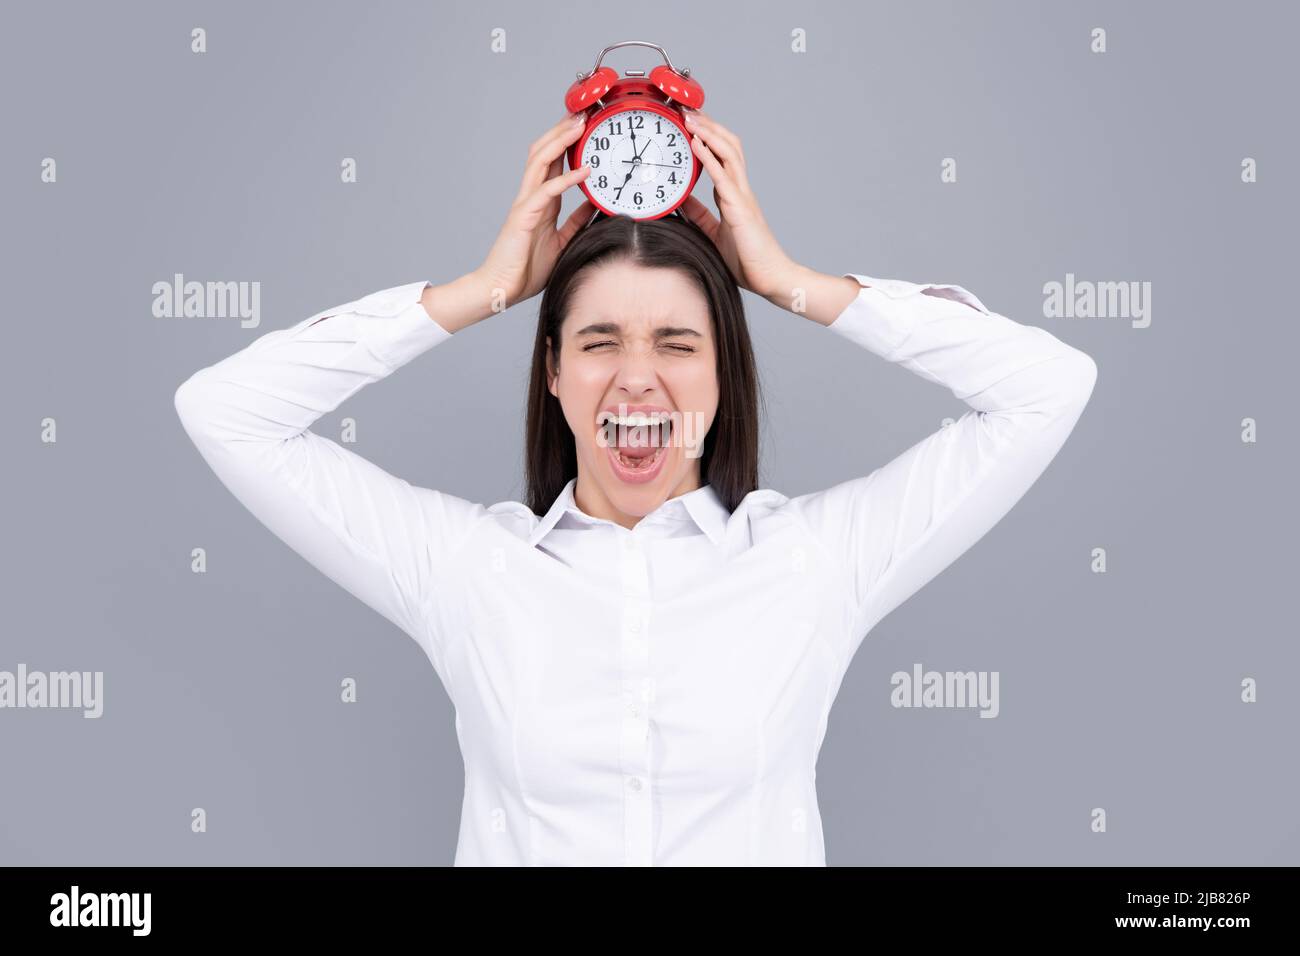 Funny excited woman at morning time holding alarm clock. Stock Photo